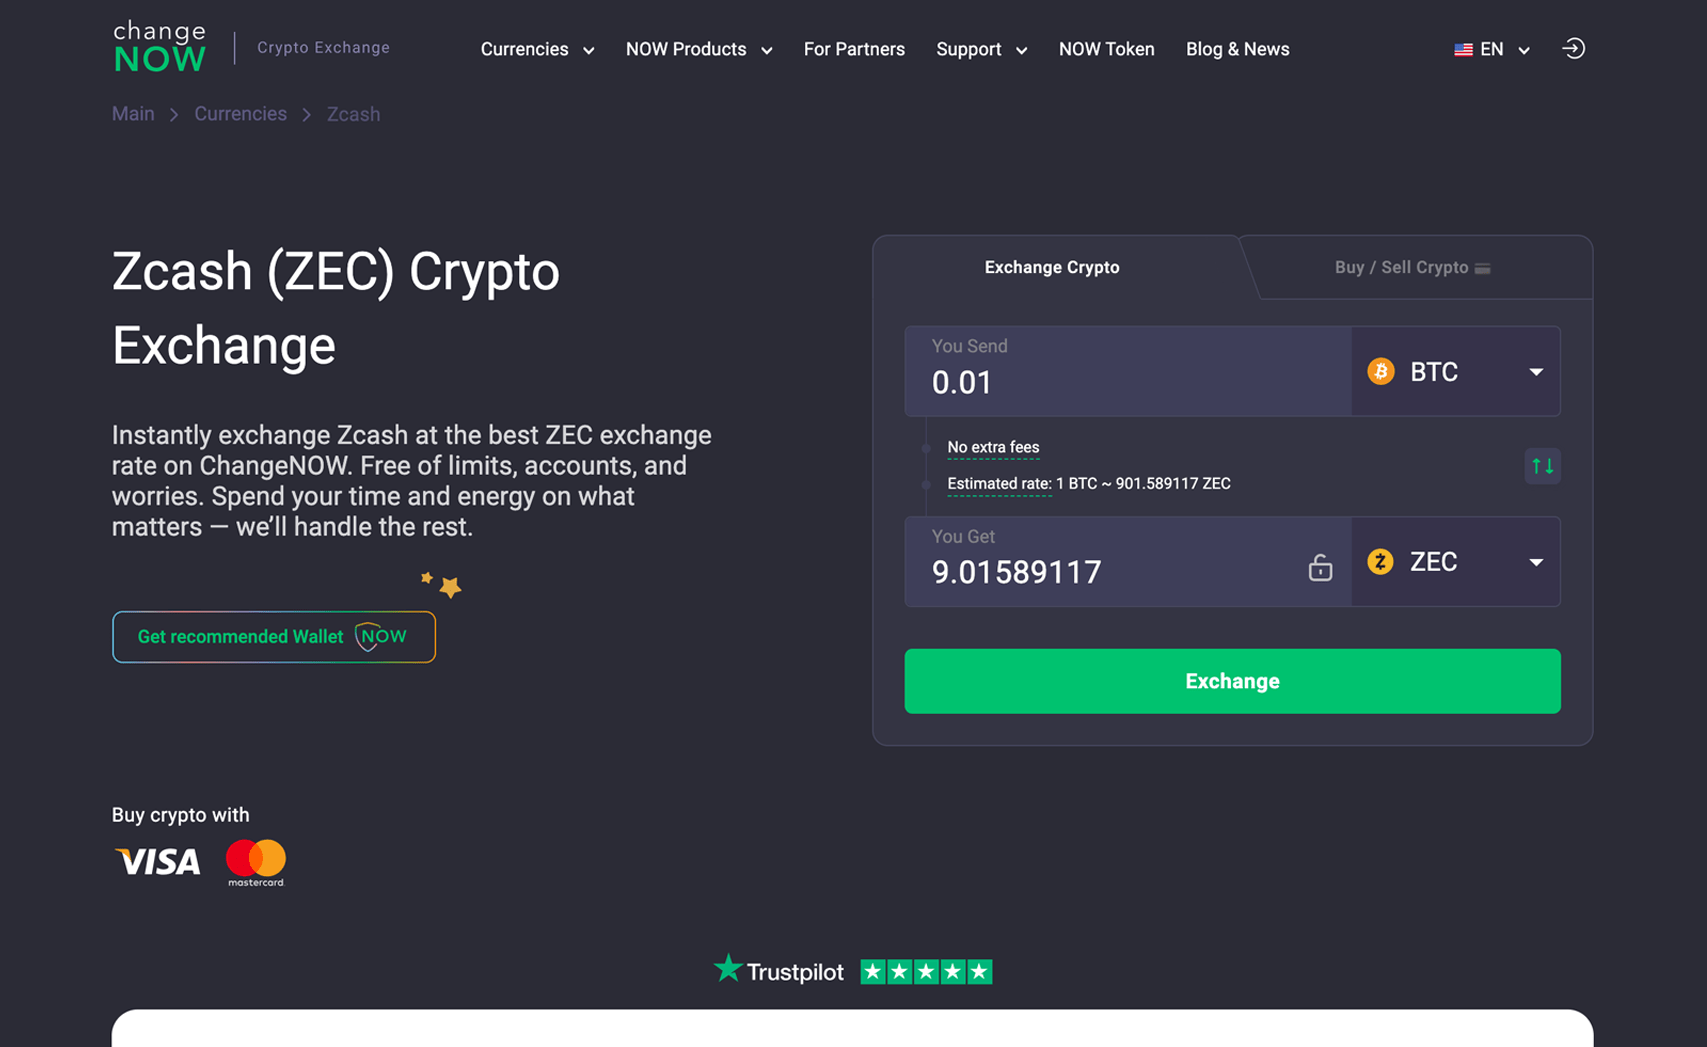 Changenow Website's homepage shown on a laptop